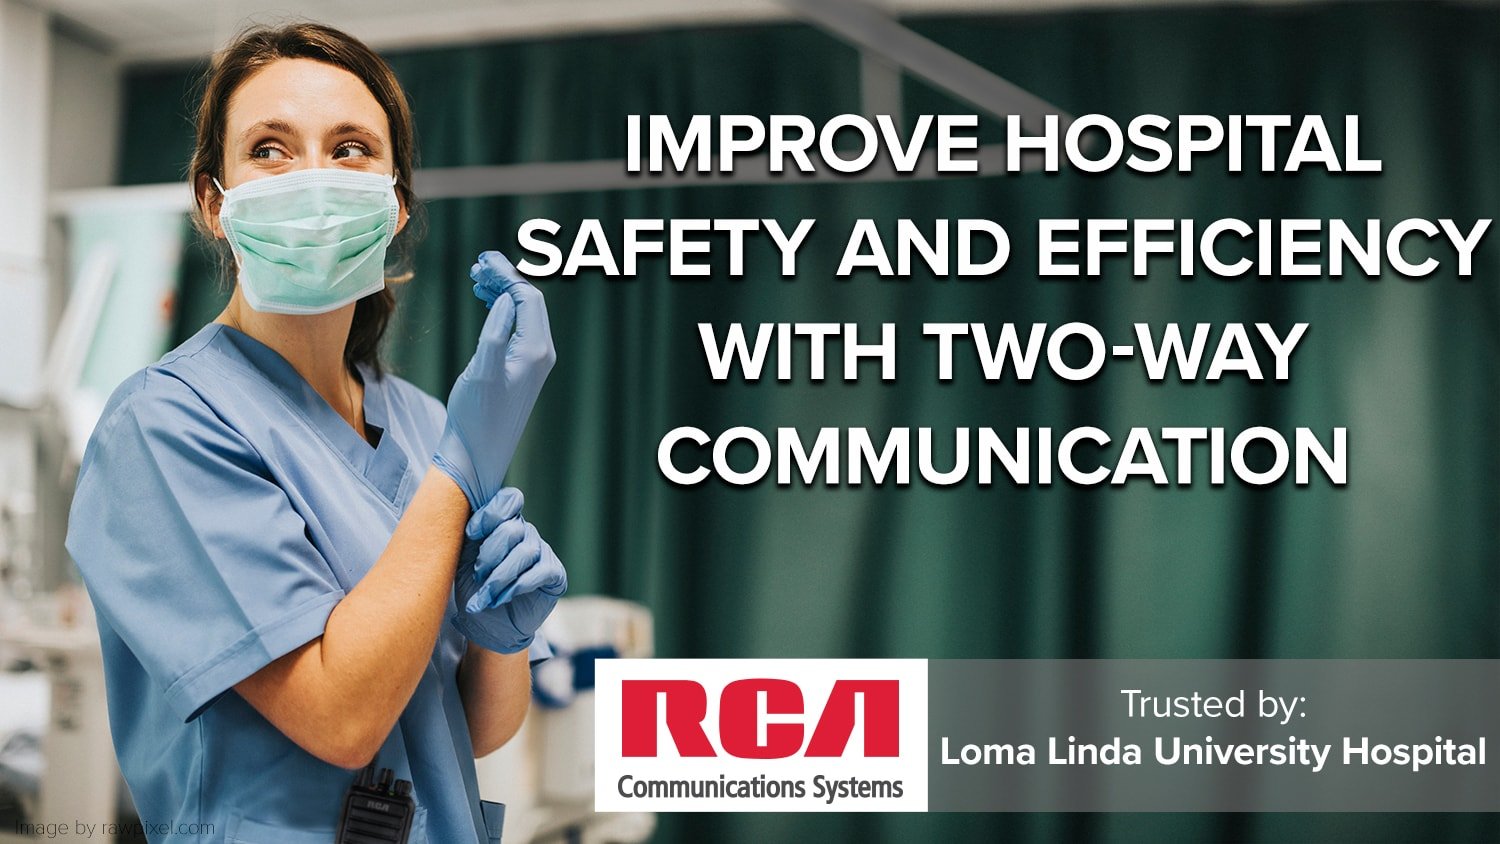 A nurse wearing a facemask and scrubs has an RCA two-way radio clipped to her pocket. A tagline reads, "Improve Hospital Safety and Efficiency With Two-Way Communication."